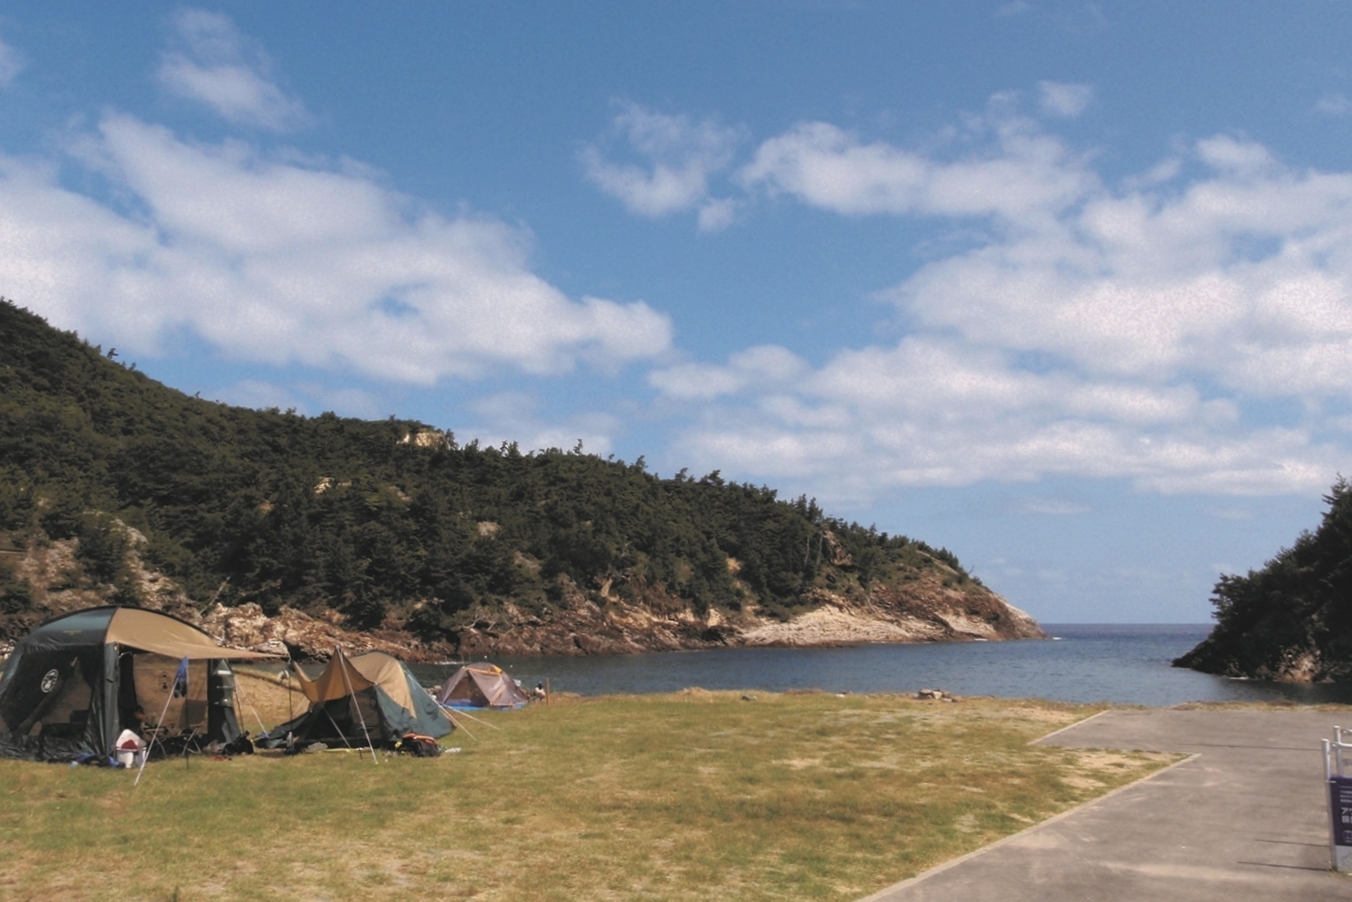 Mimiura Campground, a campground right by the sea